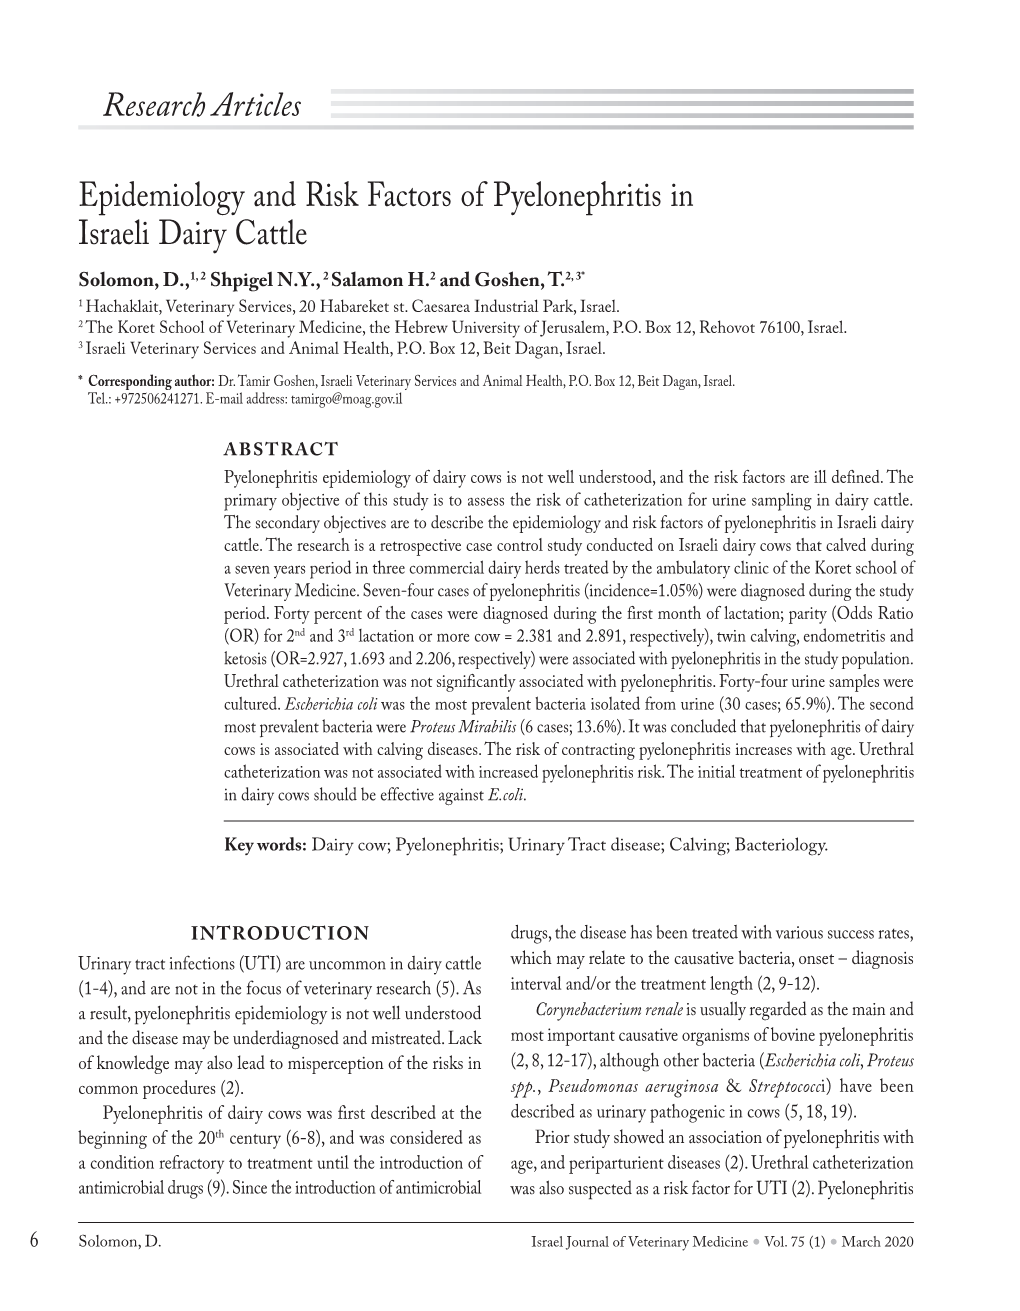 Epidemiology and Risk Factors of Pyelonephritis in Israeli Dairy Cattle